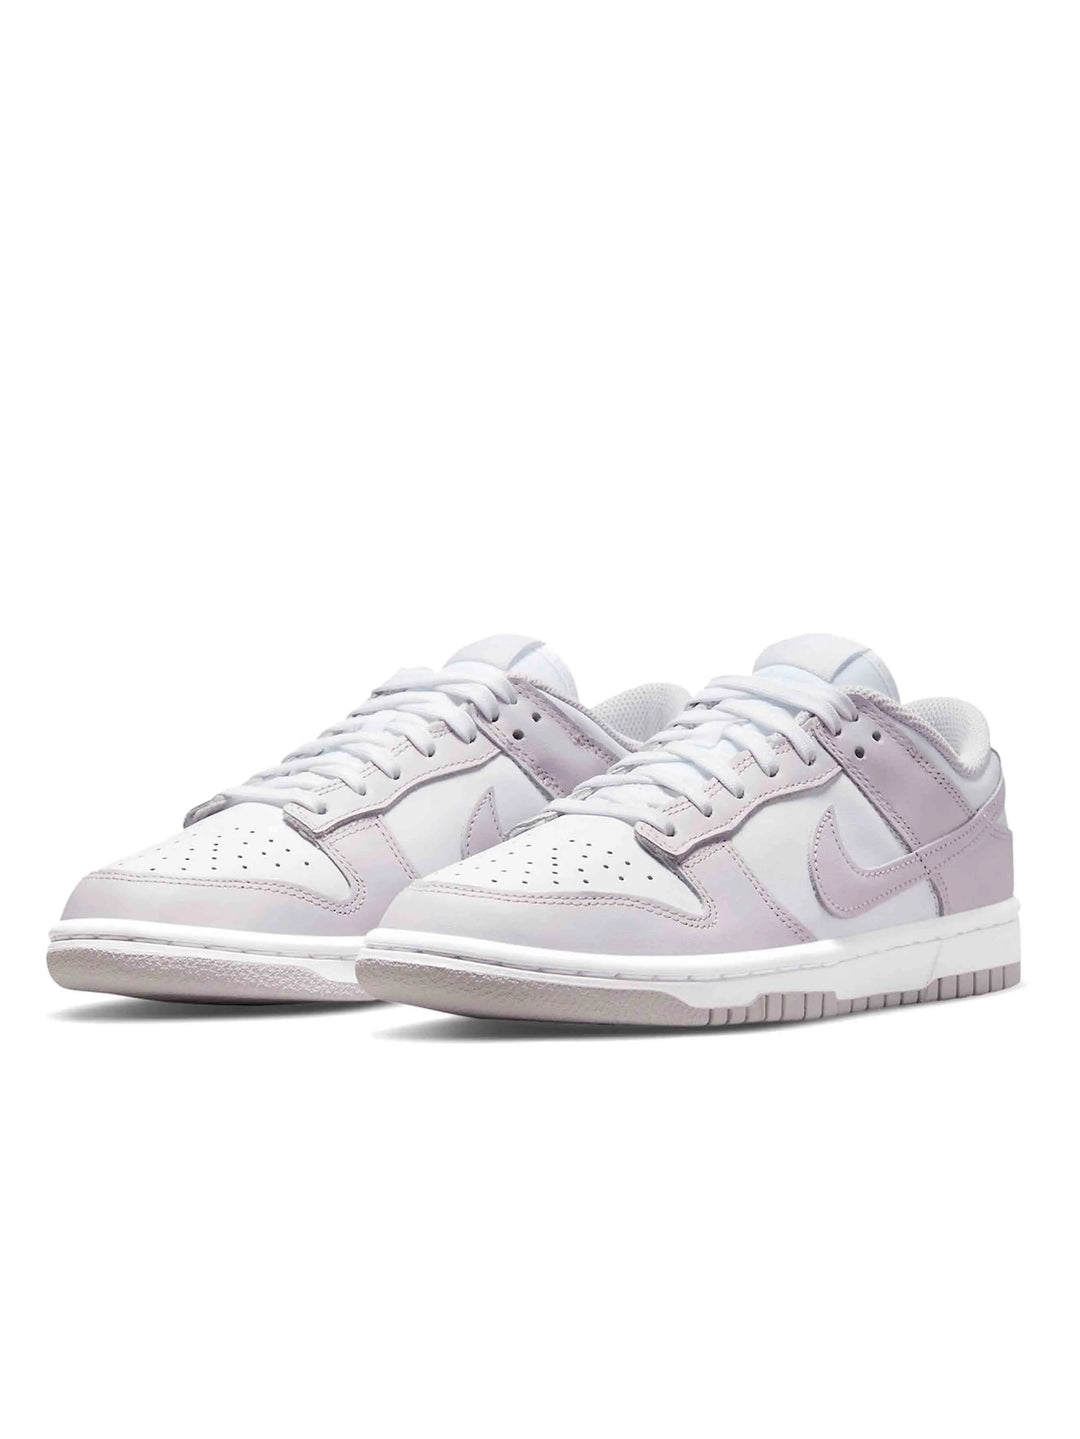 Nike Dunk Low Venice (Women's) Prior